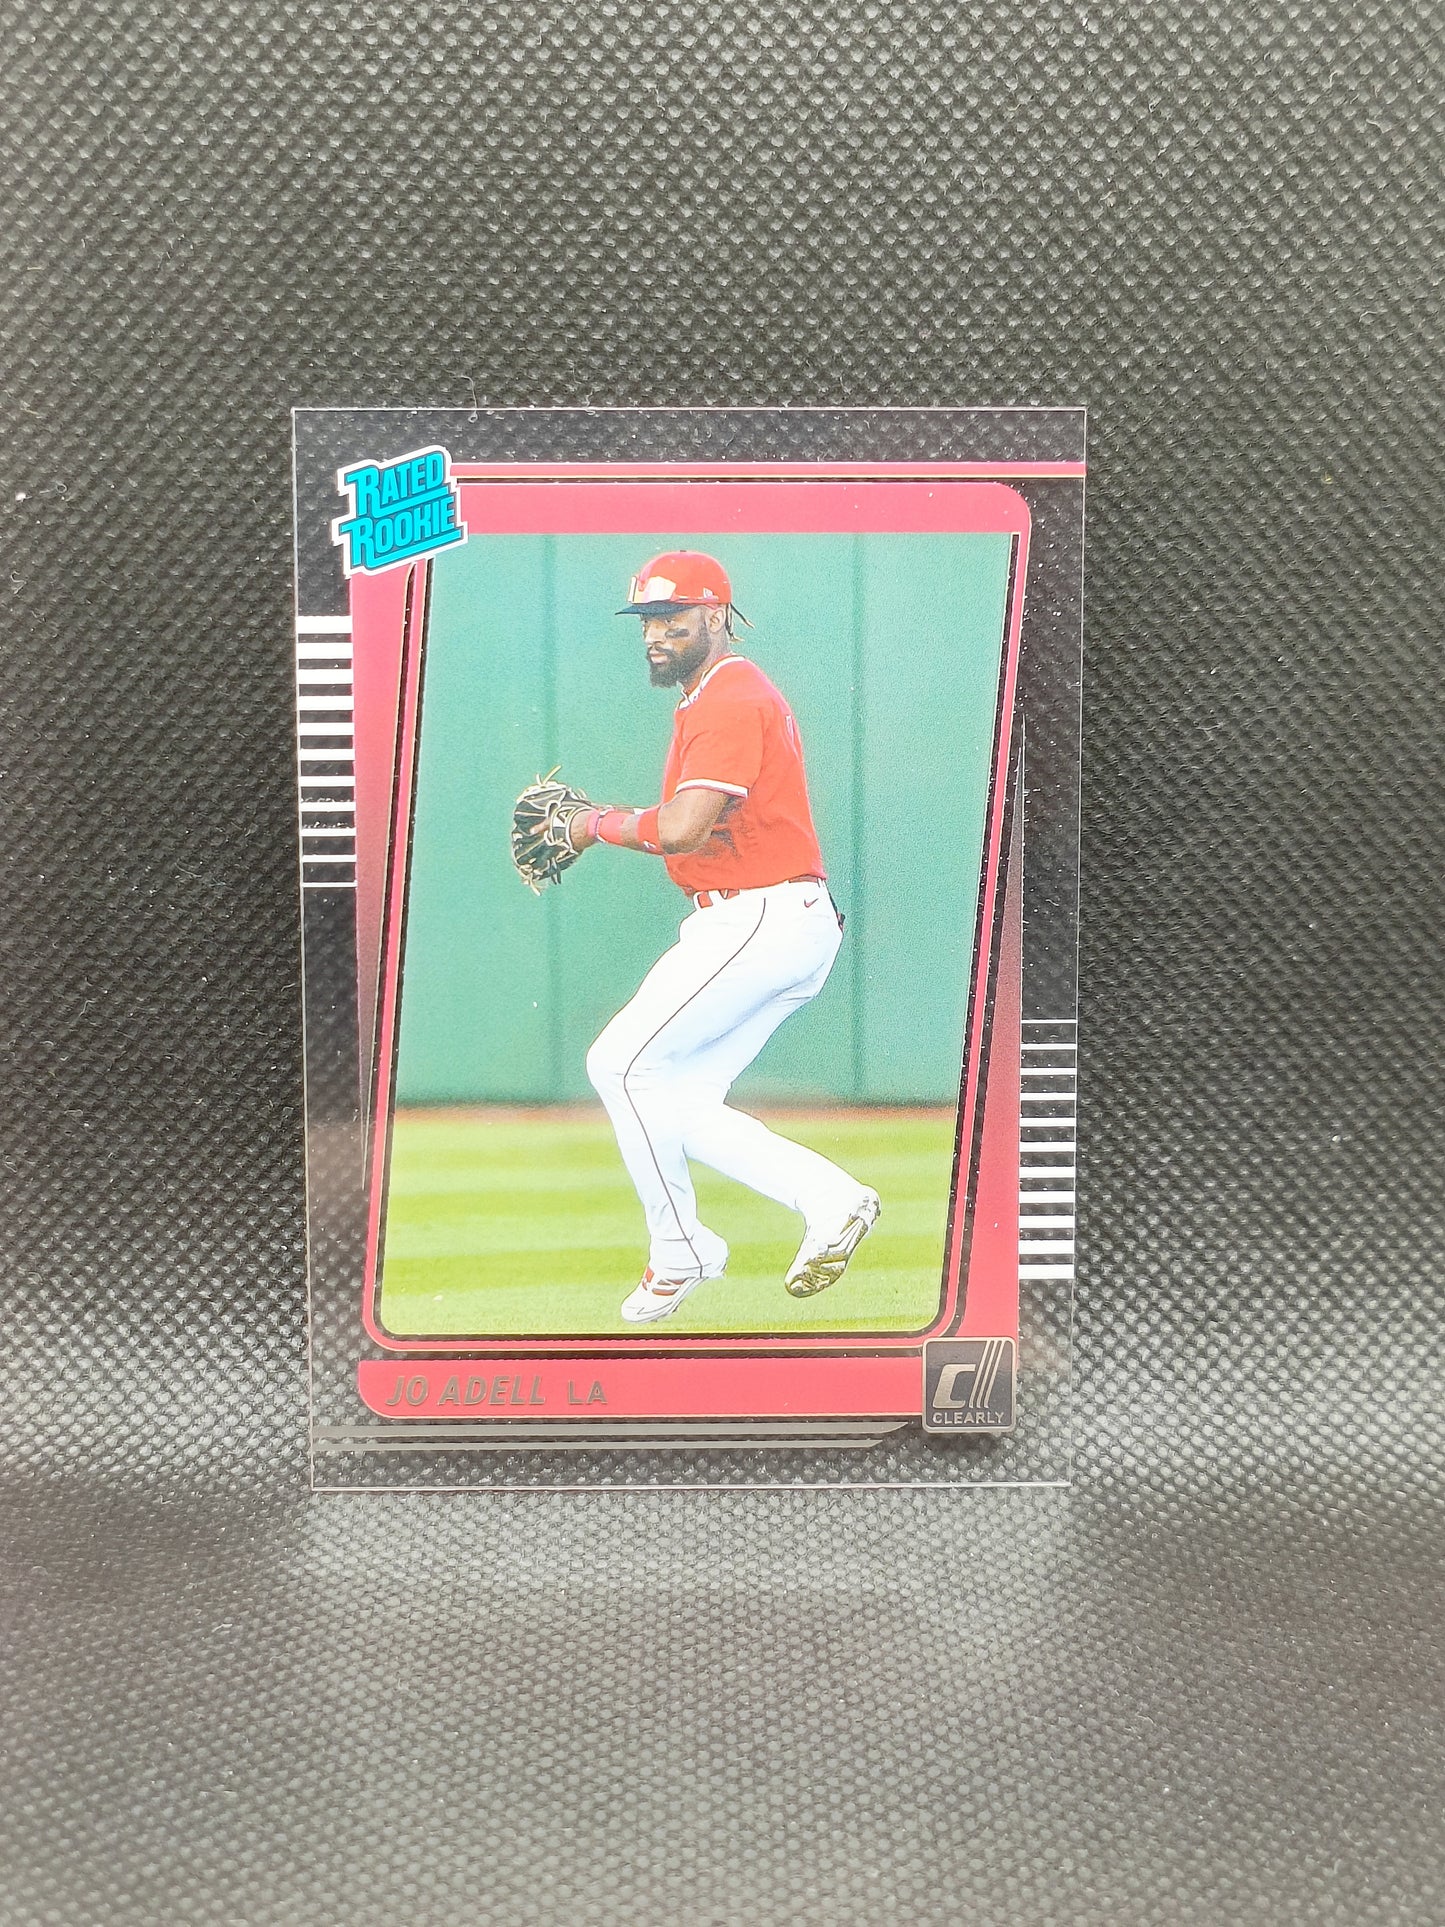 Jo Adell - 2021 Panini Chronicles Clearly Donruss Rookie - LA Angels